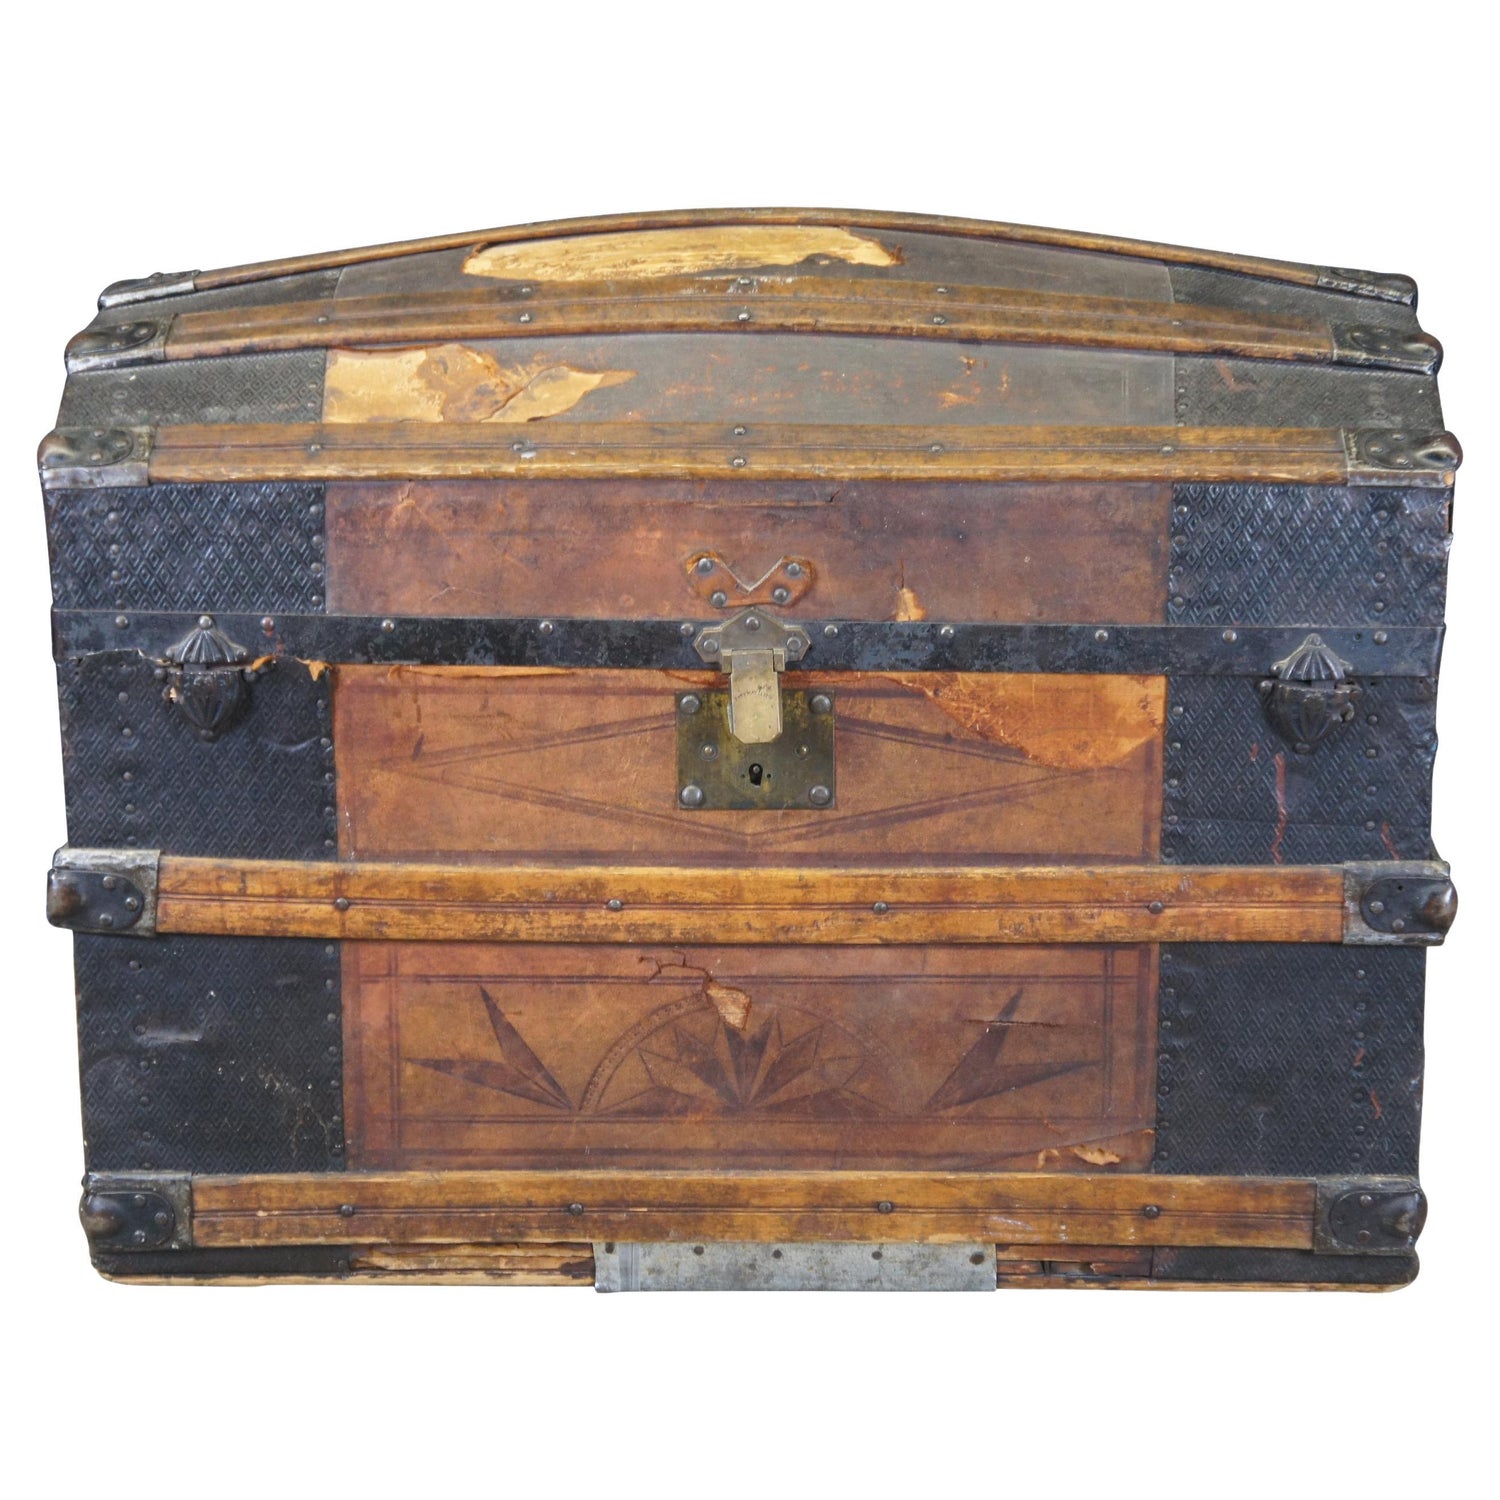 Leather Portmanteau Travelling Bag by William Bisset of Dundee, circa 1870